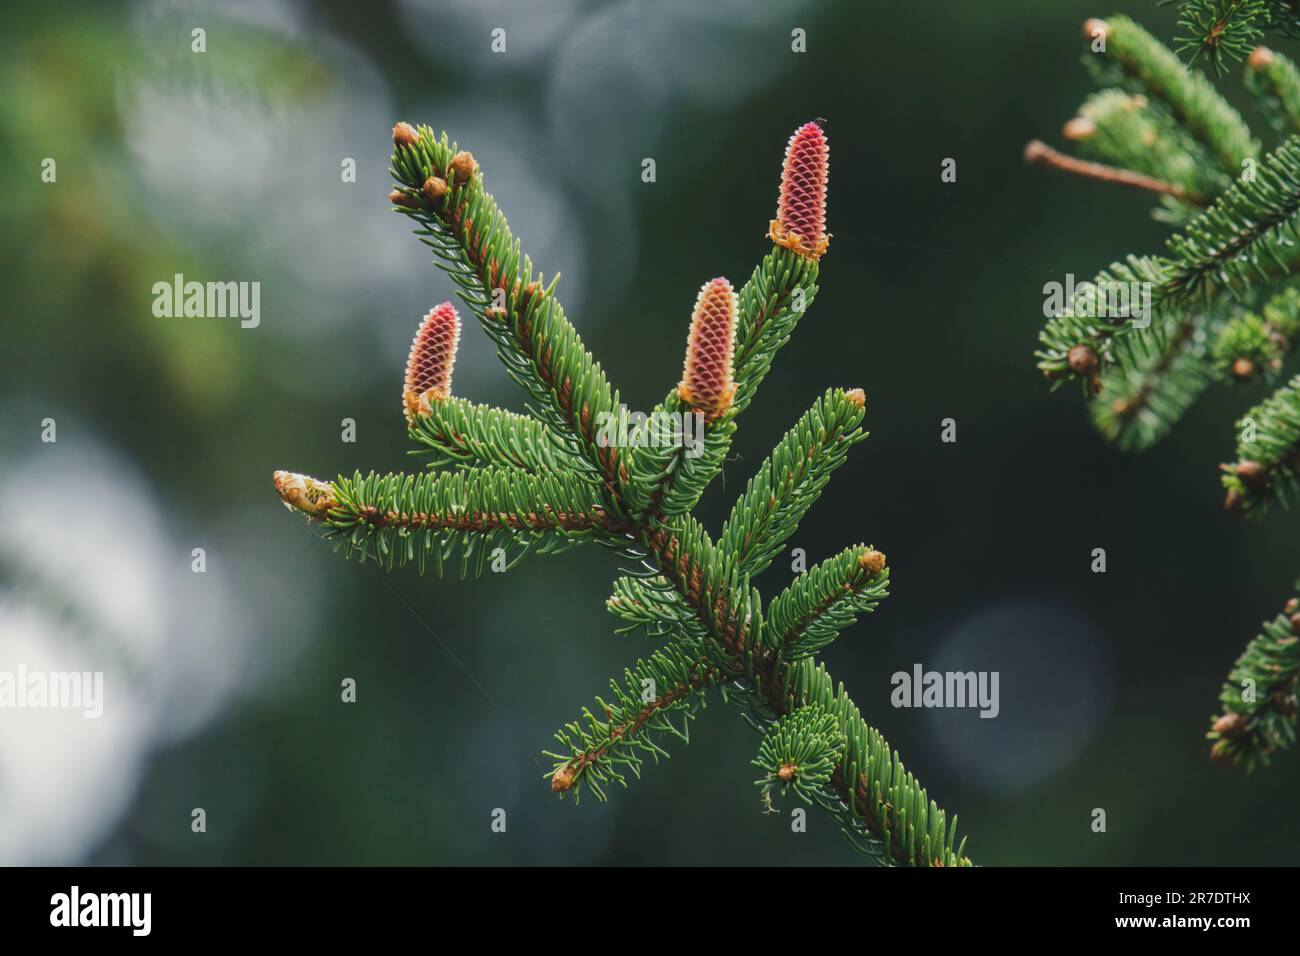 the young red cones from a spruce tree at a summer day on the mountains Stock Photo